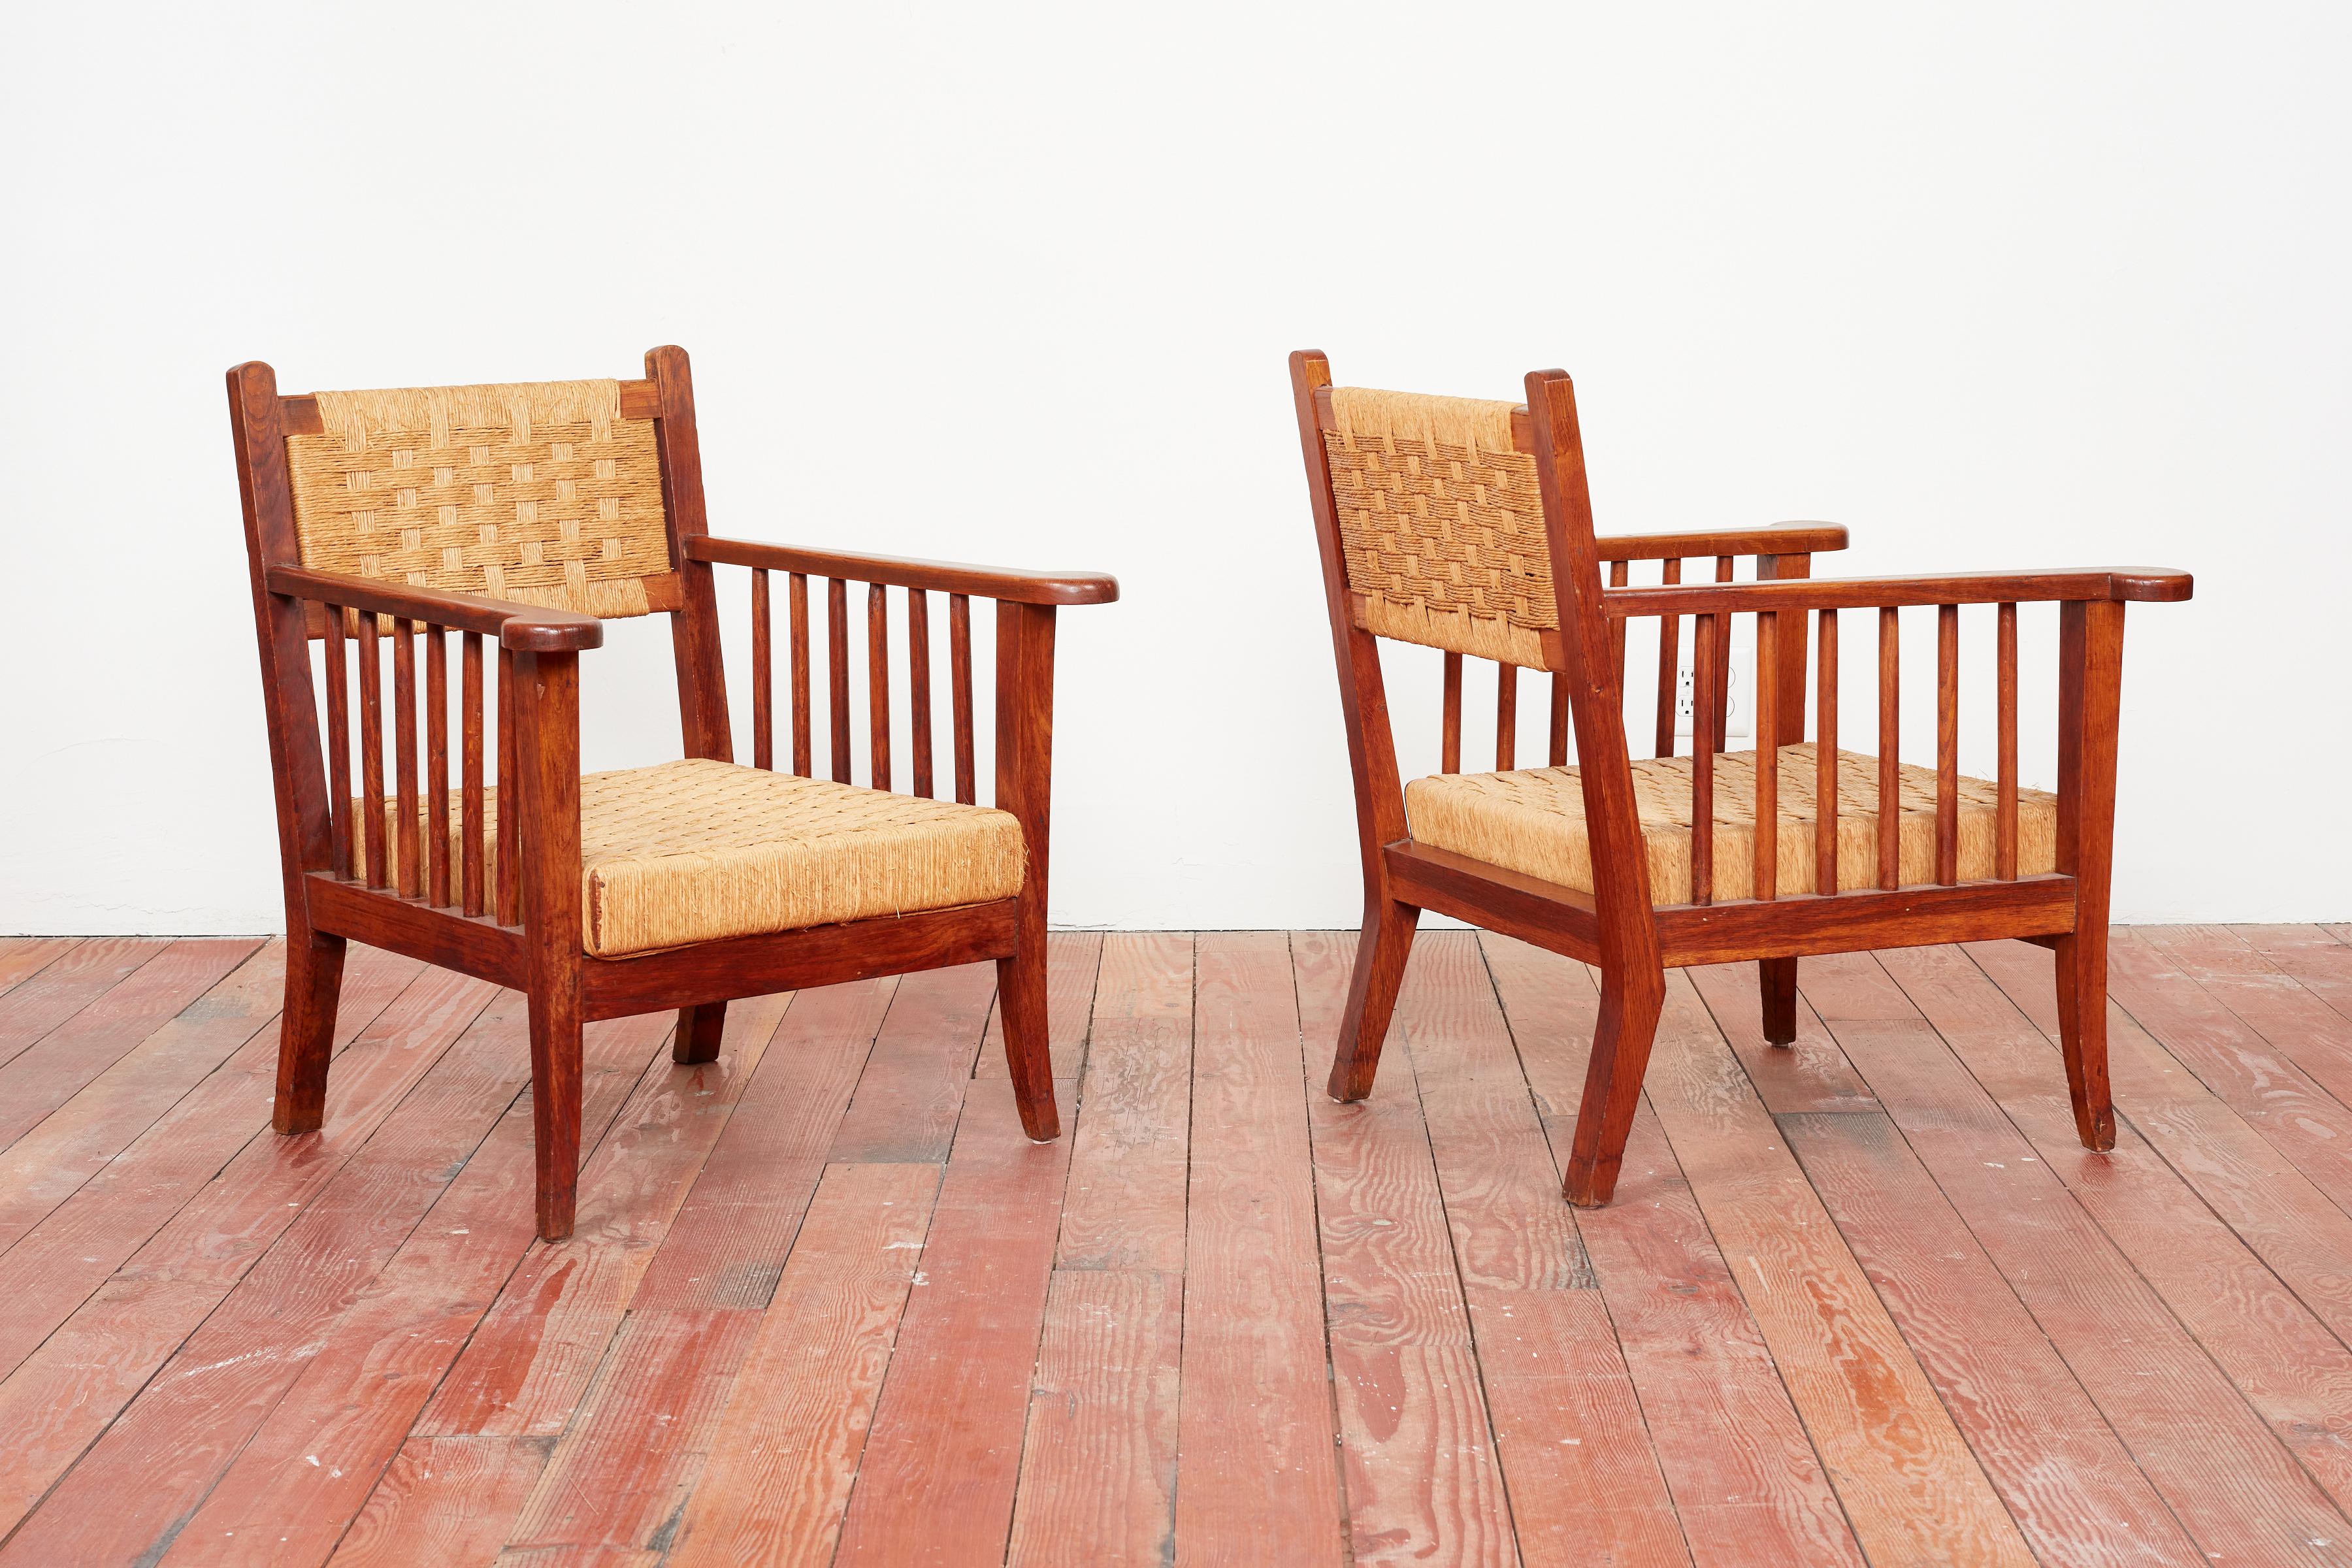 Pair of woven chairs attributed to Paolo Buffa - Italy, 1940s 
Great angular shaped wood frame and legs with original straw seat and back. 
Spindle wood sides with curved arms. 
Great Pair!